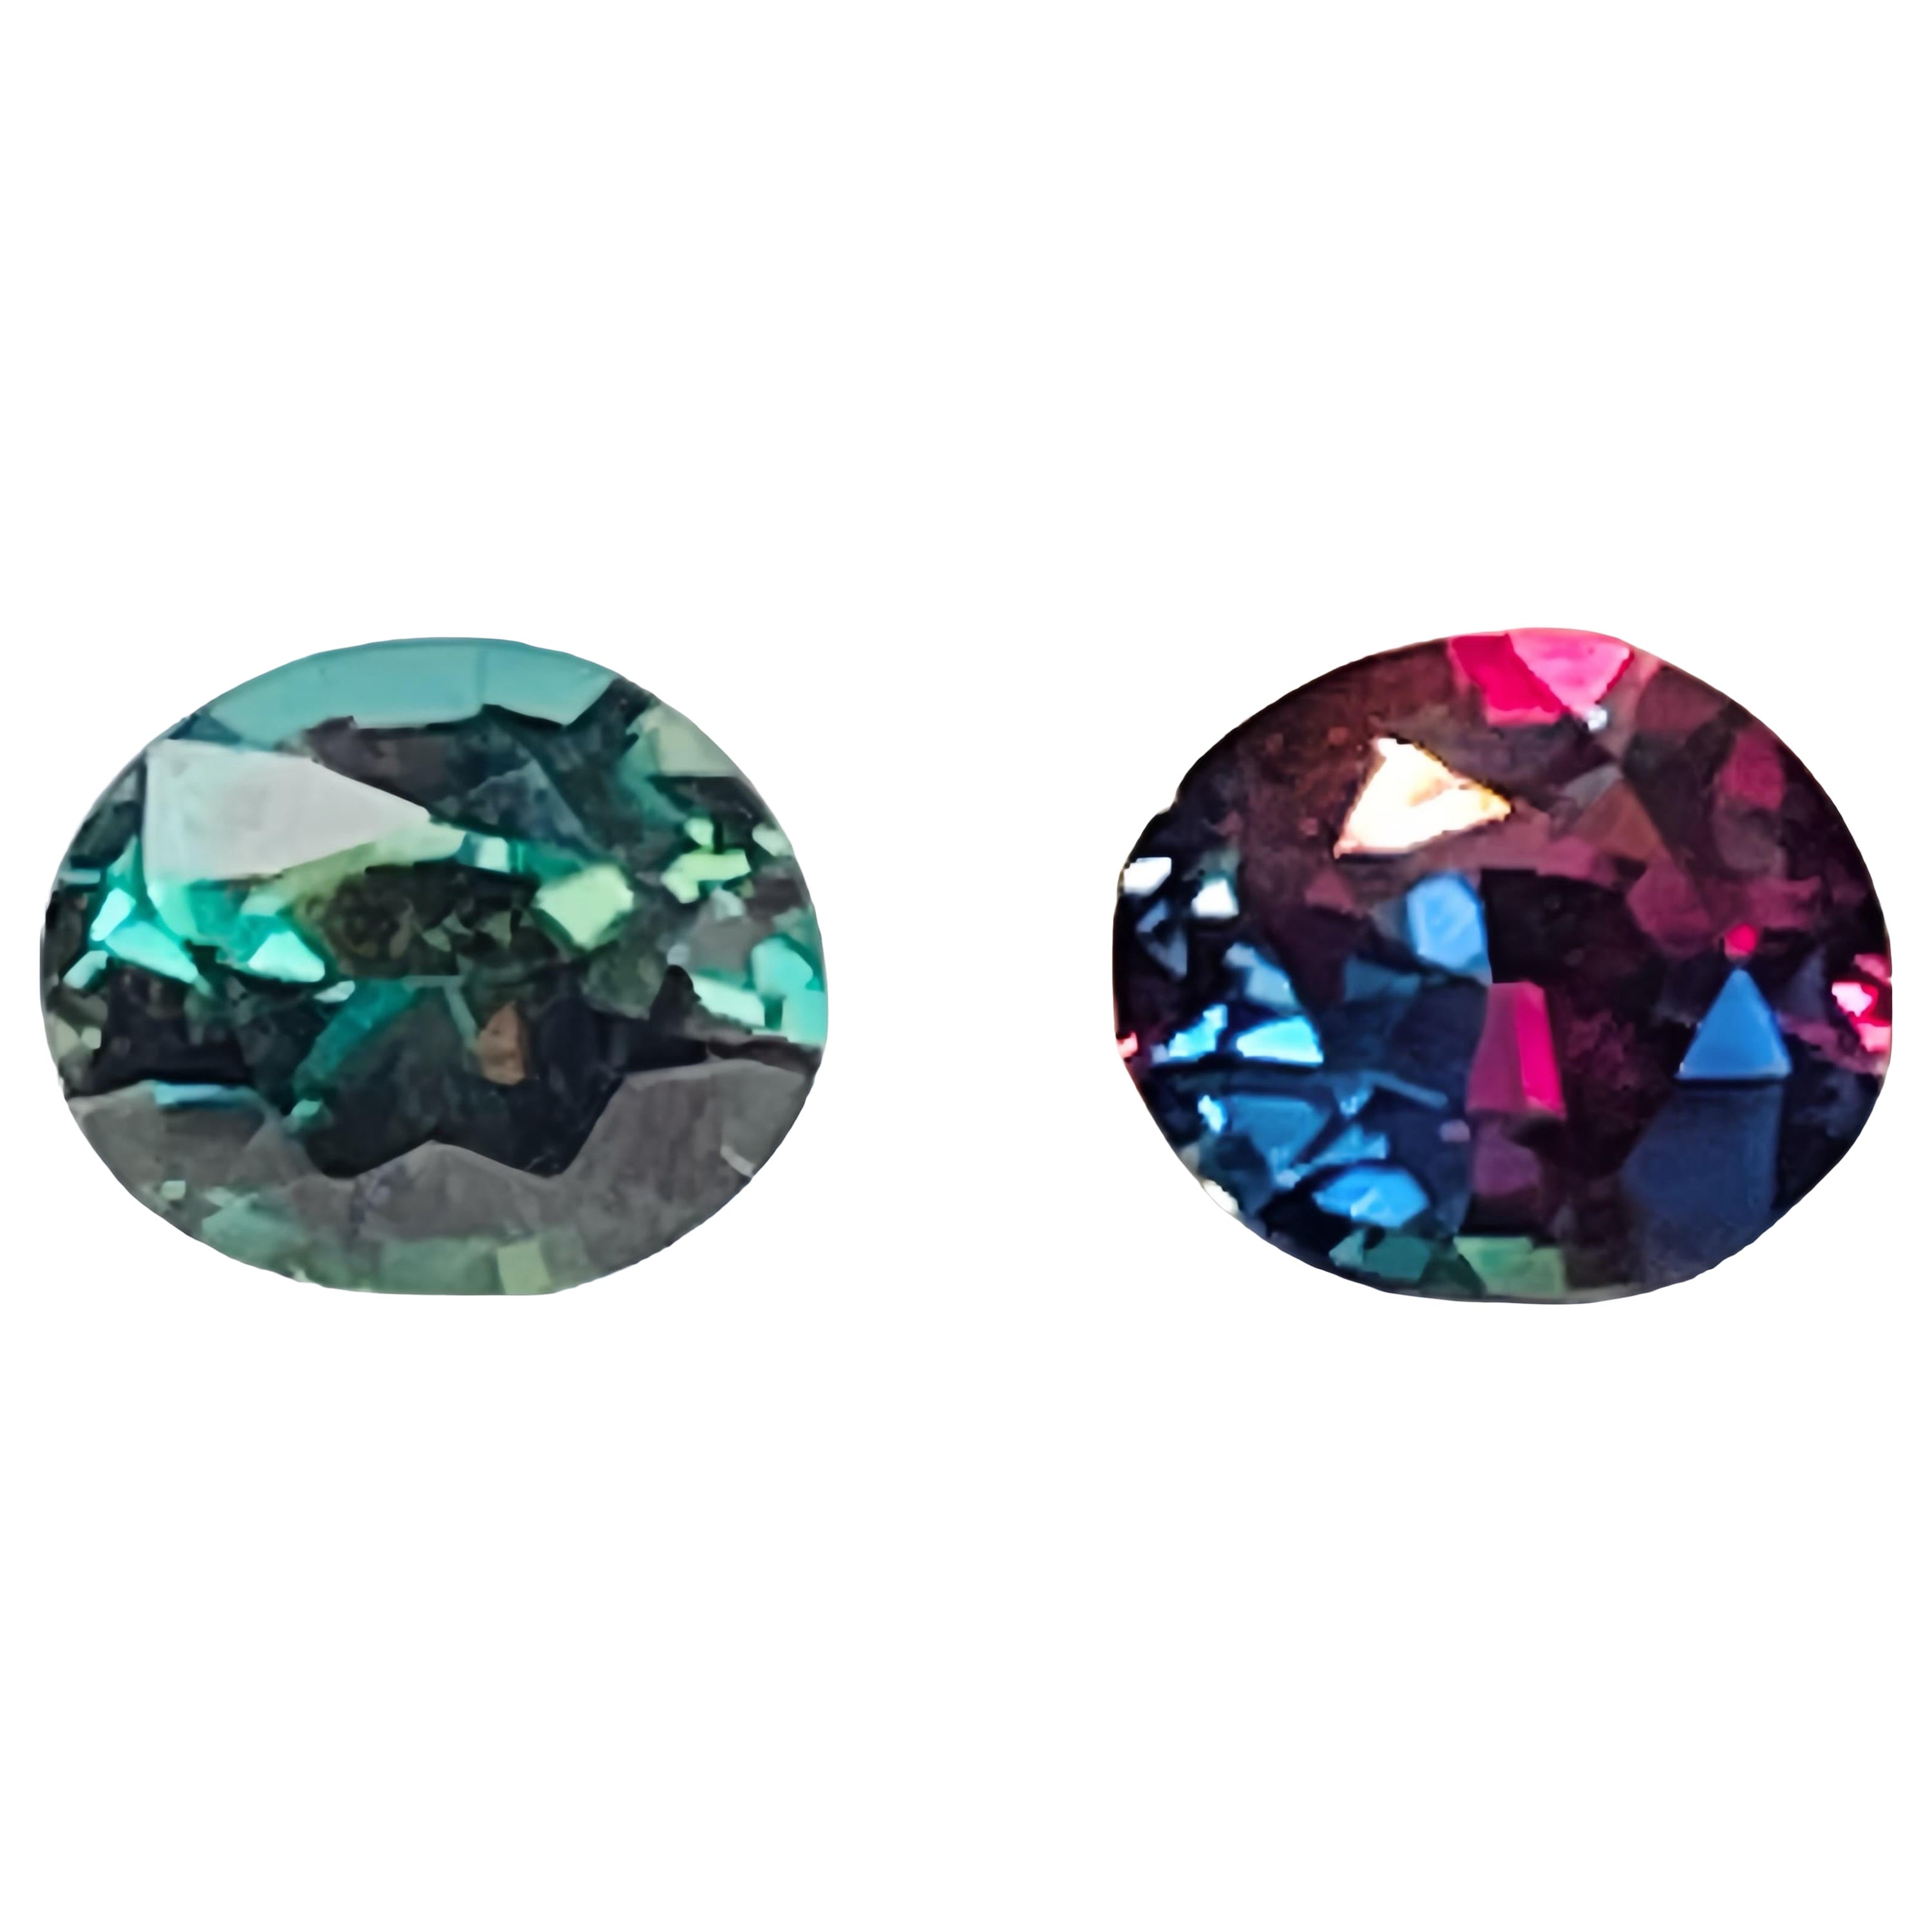 Alexandrite 0.24ct deep green to pinkish color change rare gemstone For Sale